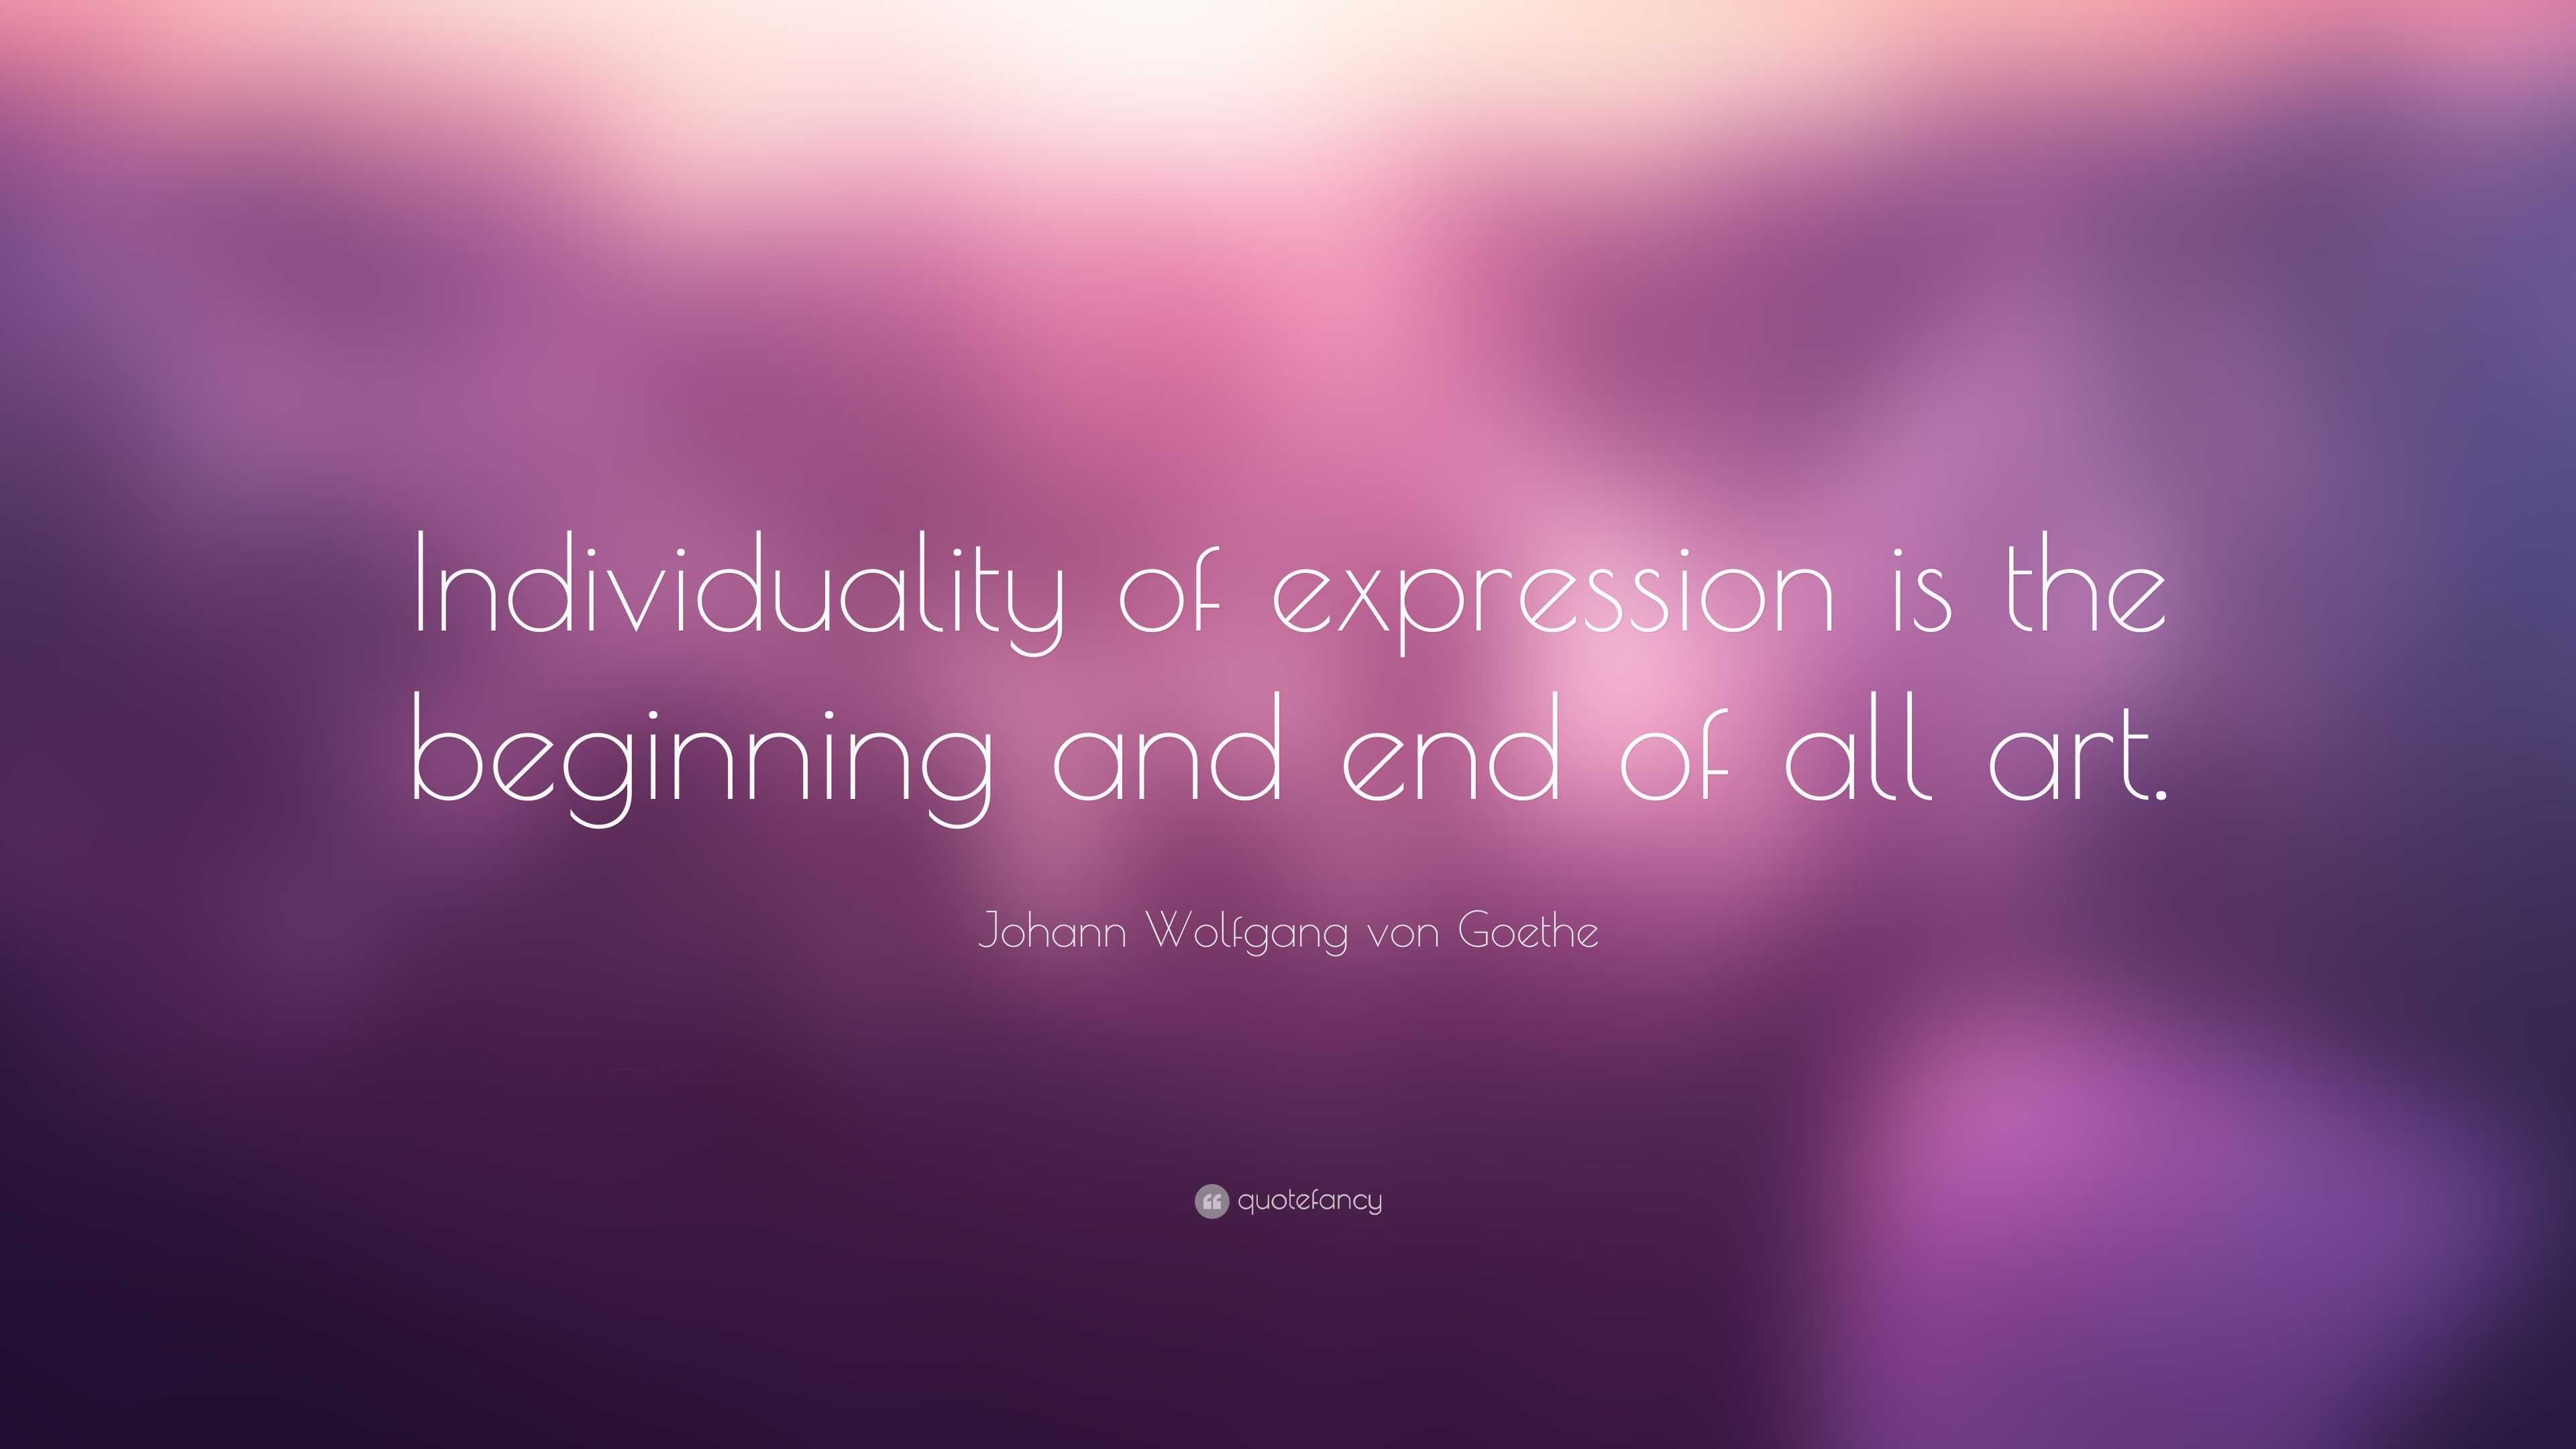 Johann Wolfgang von Goethe Quote: “Individuality of expression is the ...